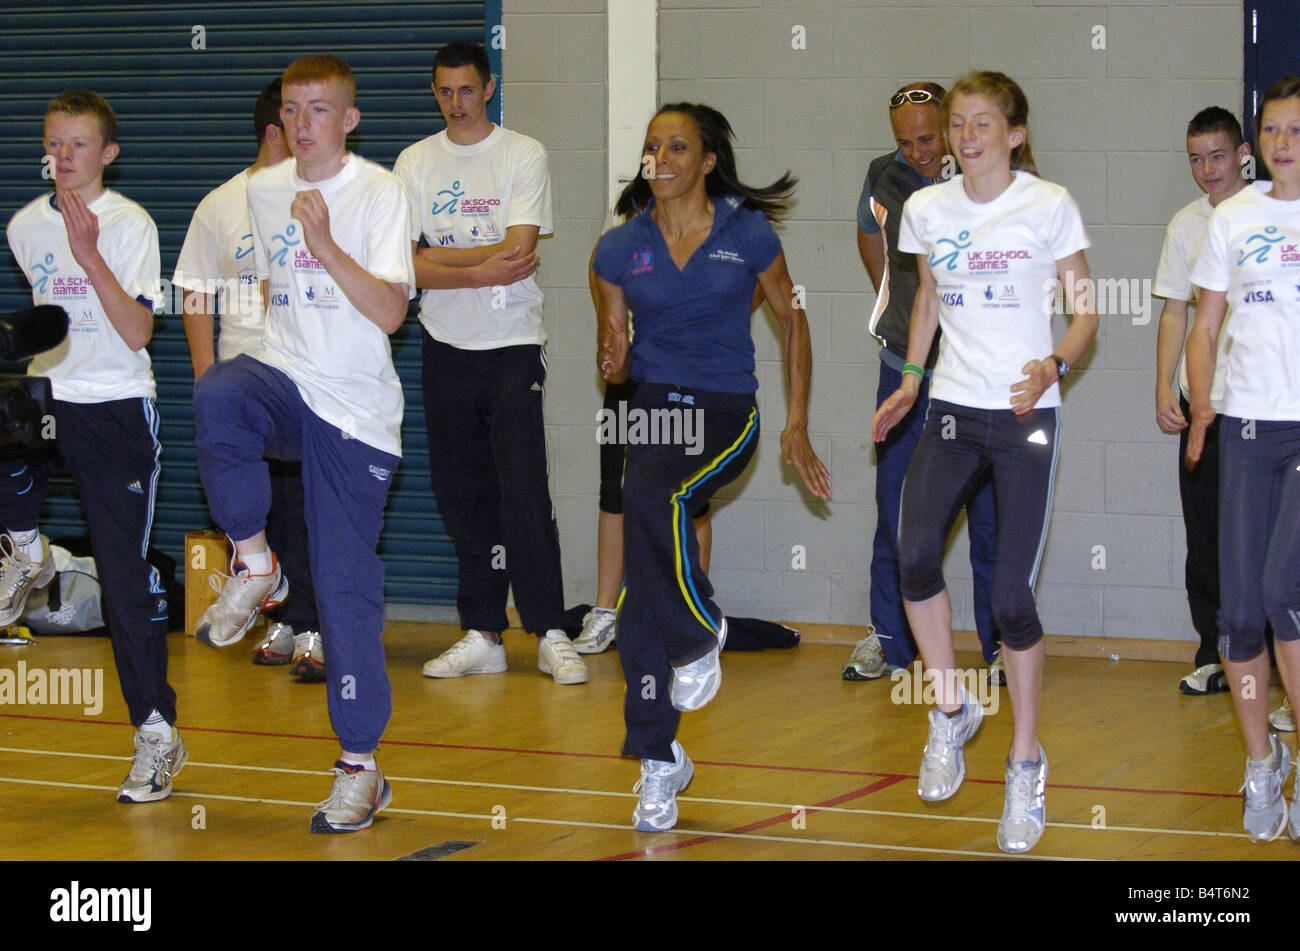 Dame Kelly Holmes with fencers Fiona Winchester and Michael Clarke promoting the forthcoming uk schools games competition Dame kelly was at scotstoun showground giving advice to kids in the sports of table tennis athletics etc Stock Photo